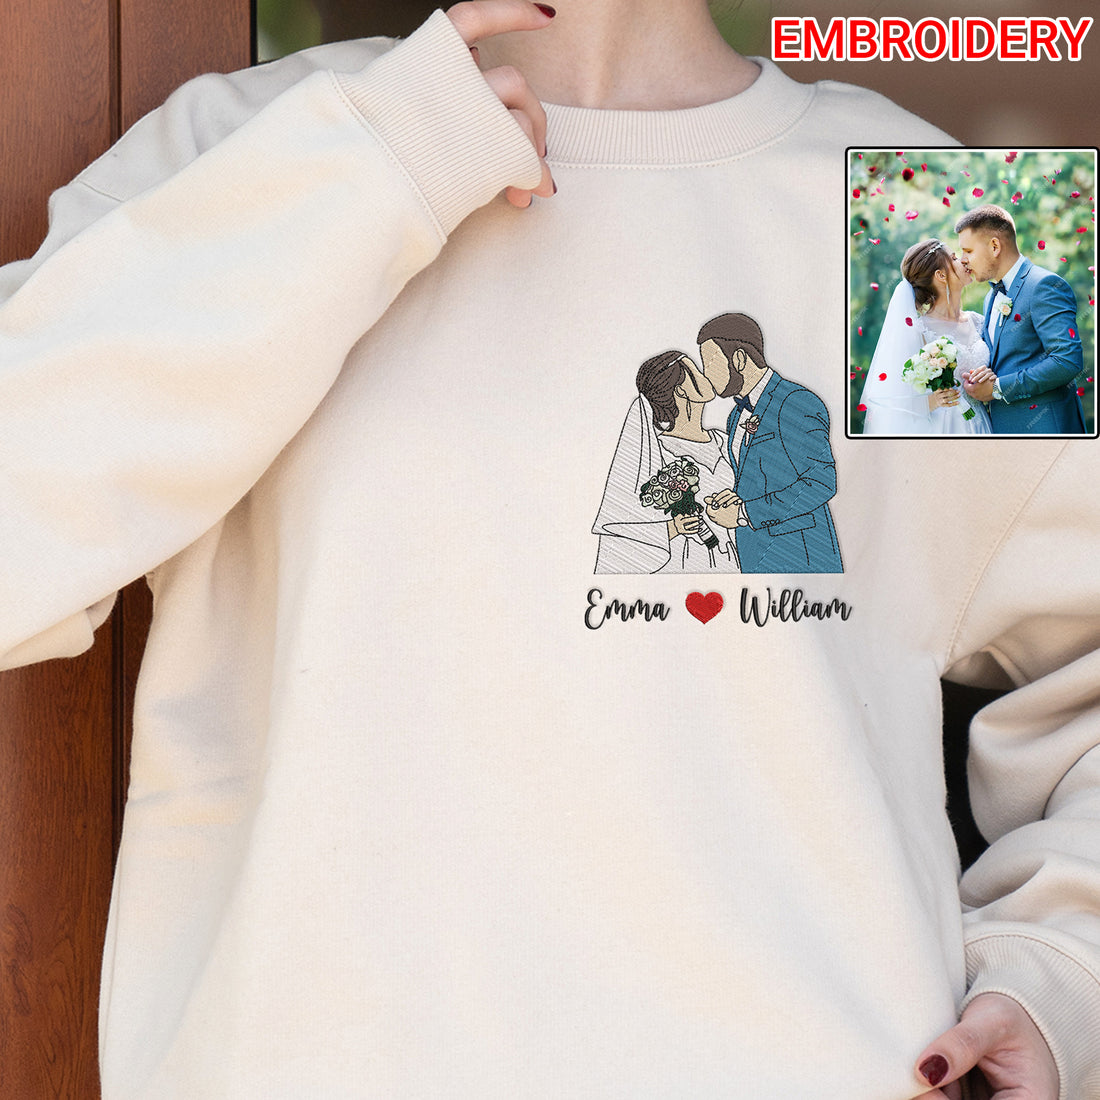 Custom Embroidered Portrait Sweatshirt from Photo, Custom Portrait Sweatshirt, Couple Portraits, Portrait from Photo, Wedding Gift, Engagement Gift, Personalized Gift